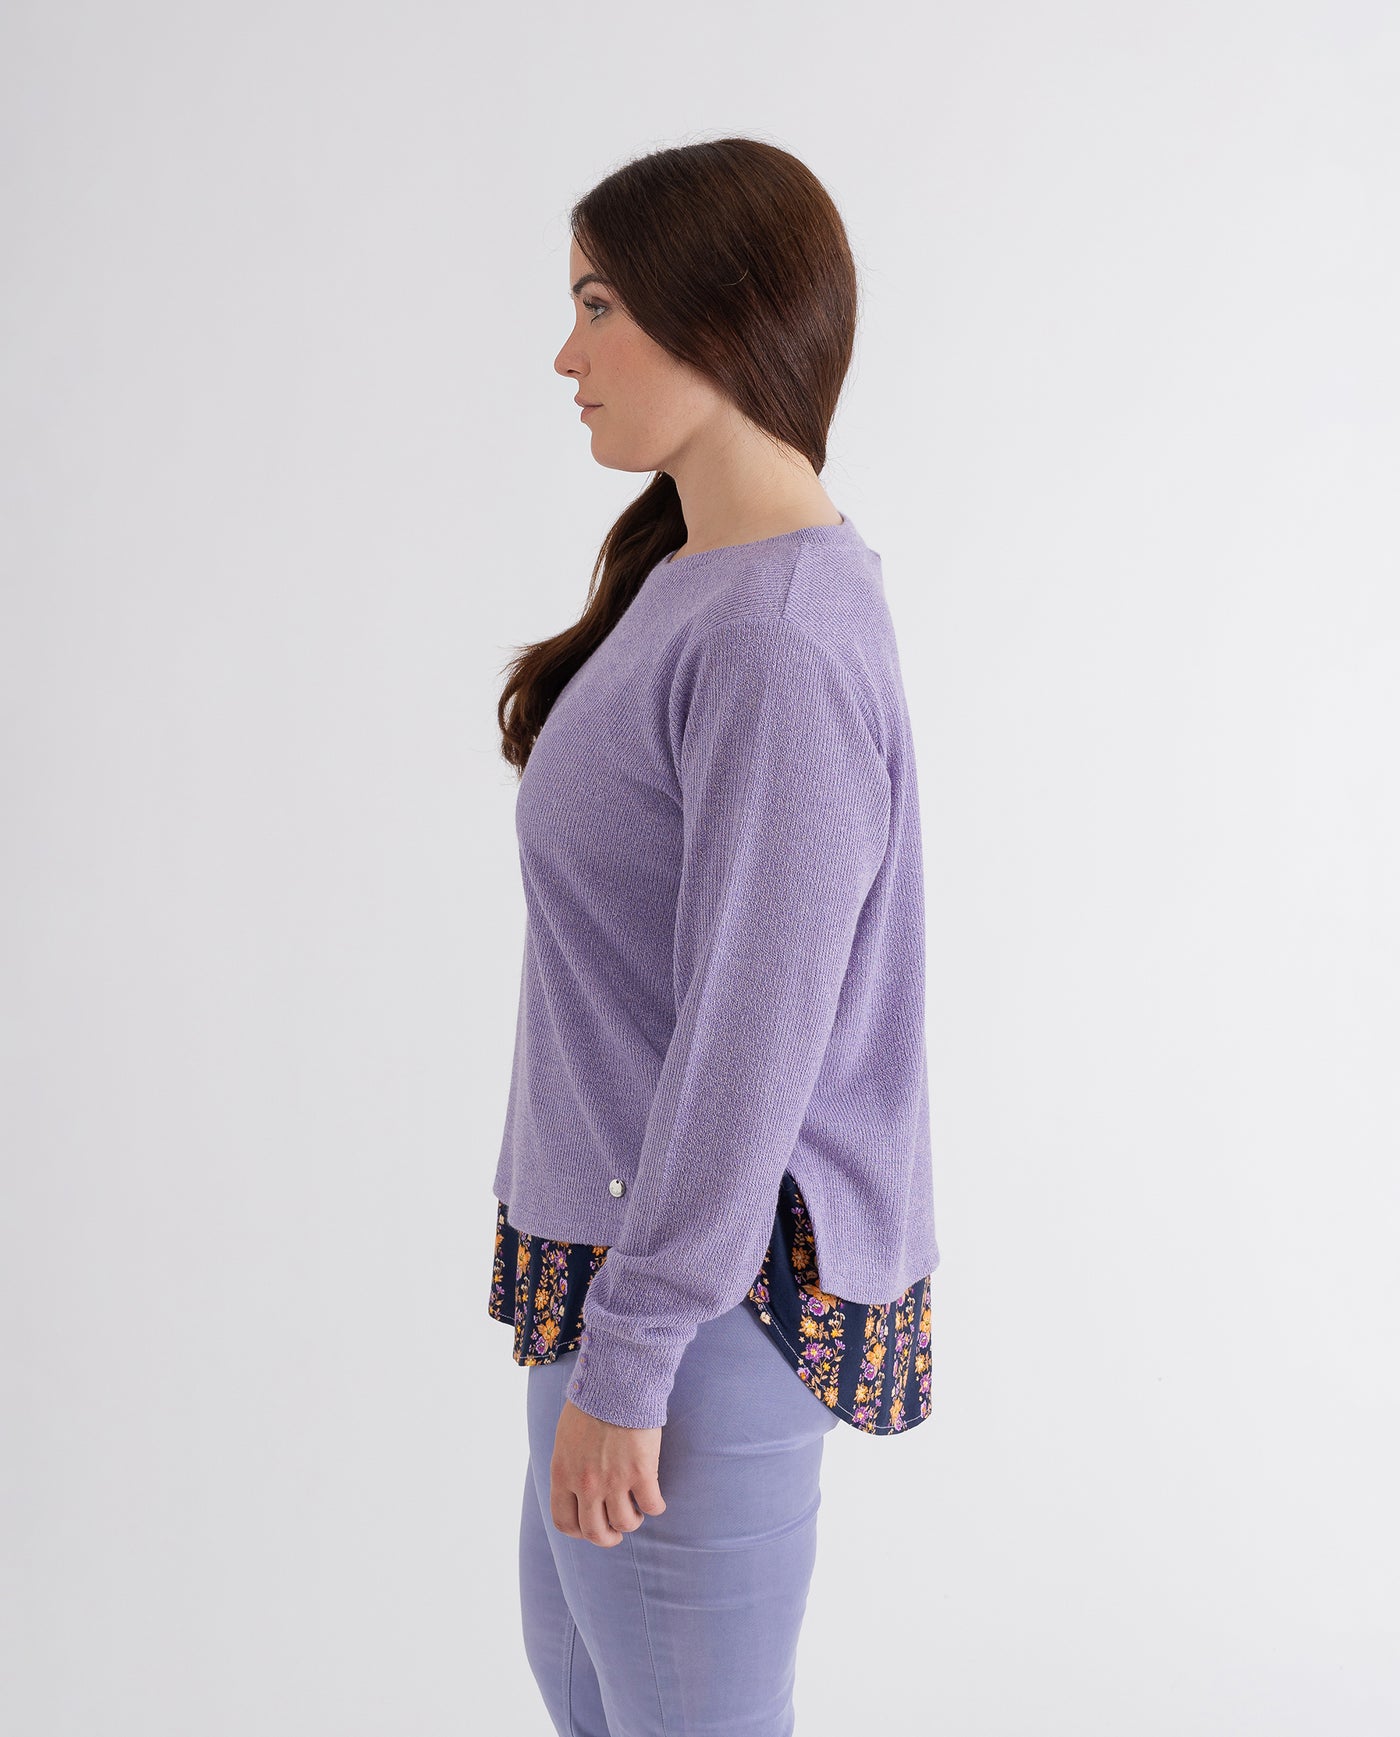 CONTRAST TOP WITH MAUVE FLOWER PRINT